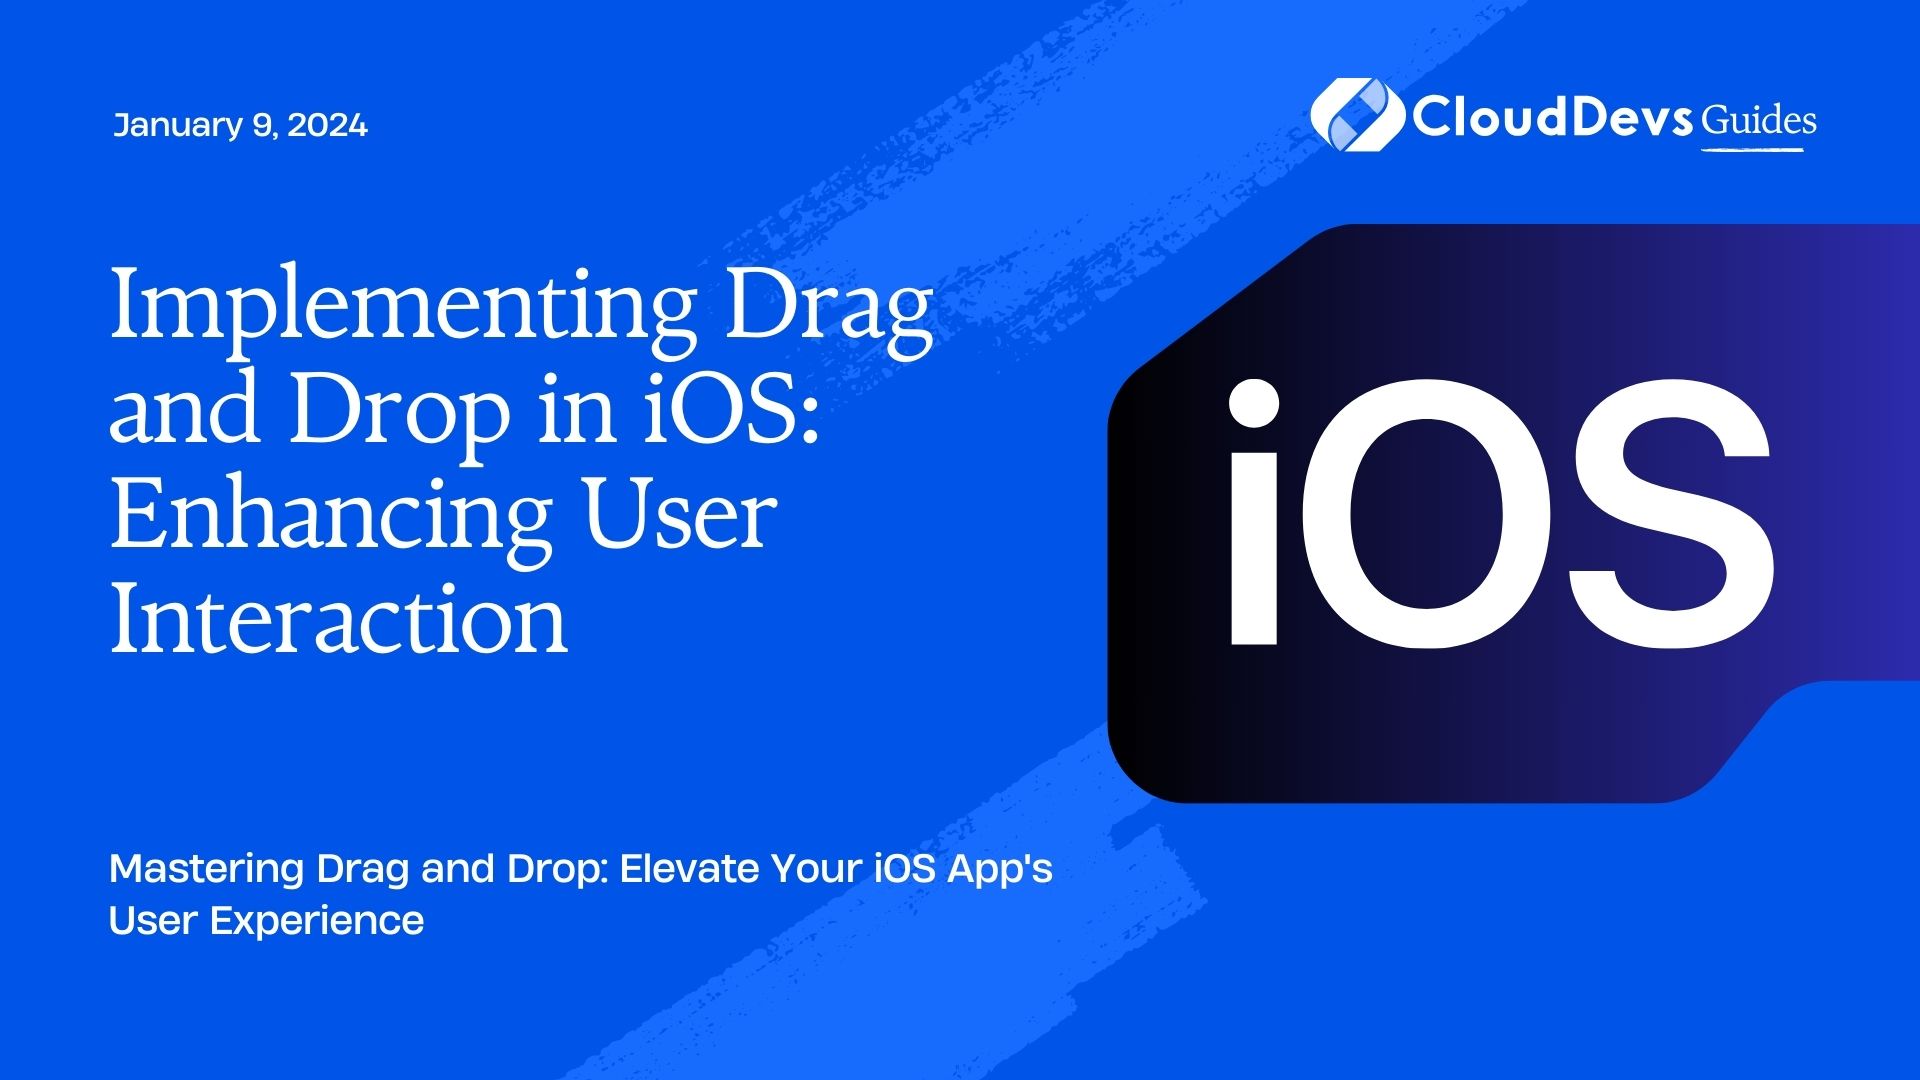 Implementing Drag and Drop in iOS: Enhancing User Interaction